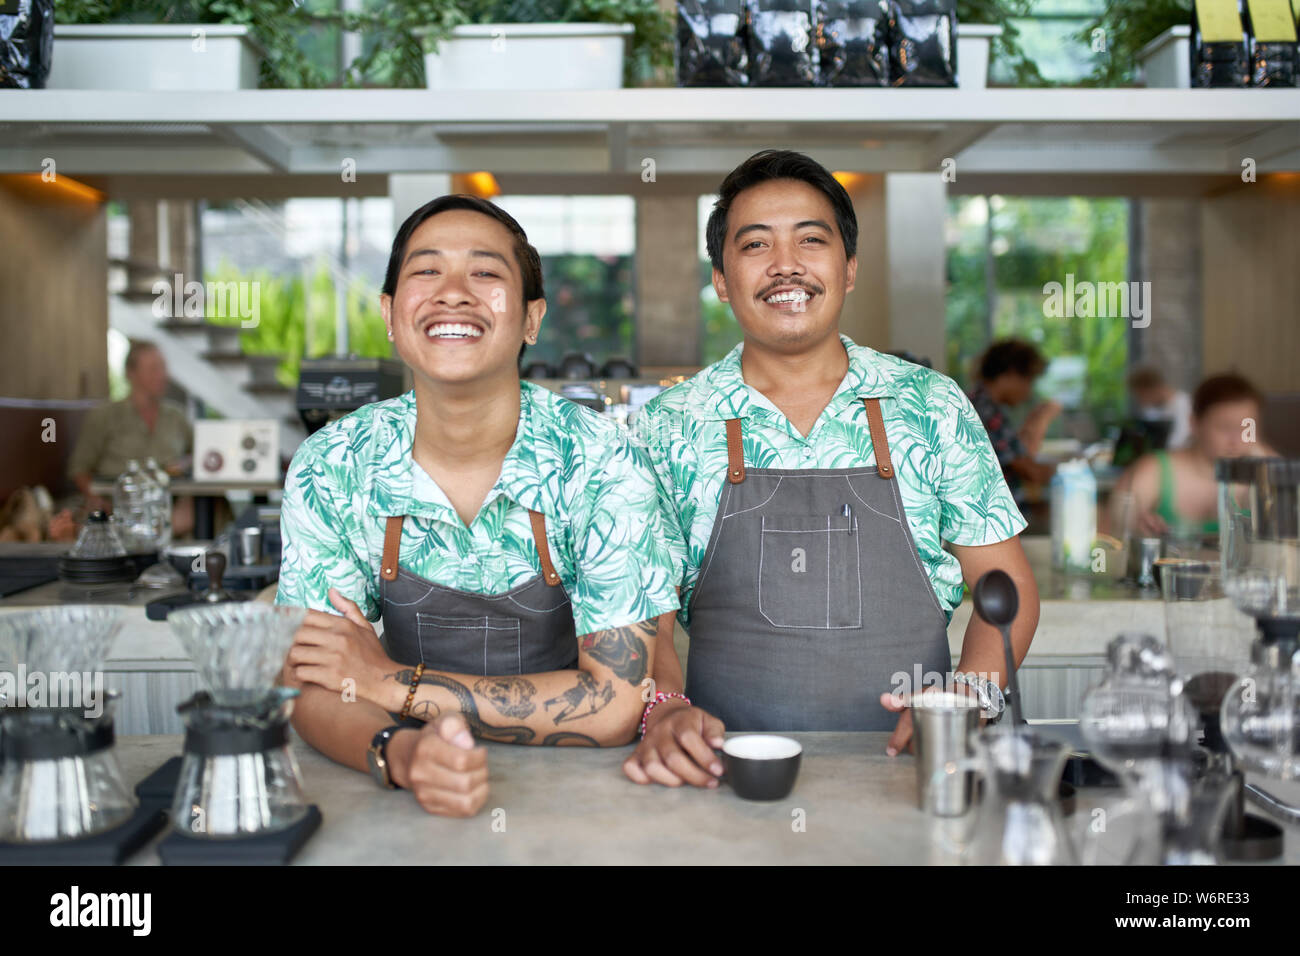 Lifestyle portrait of two friendly smiling balinese millennial baristas wearing trendy clothing and aprons in hipster cafe serving fair-trade coffee Stock Photo